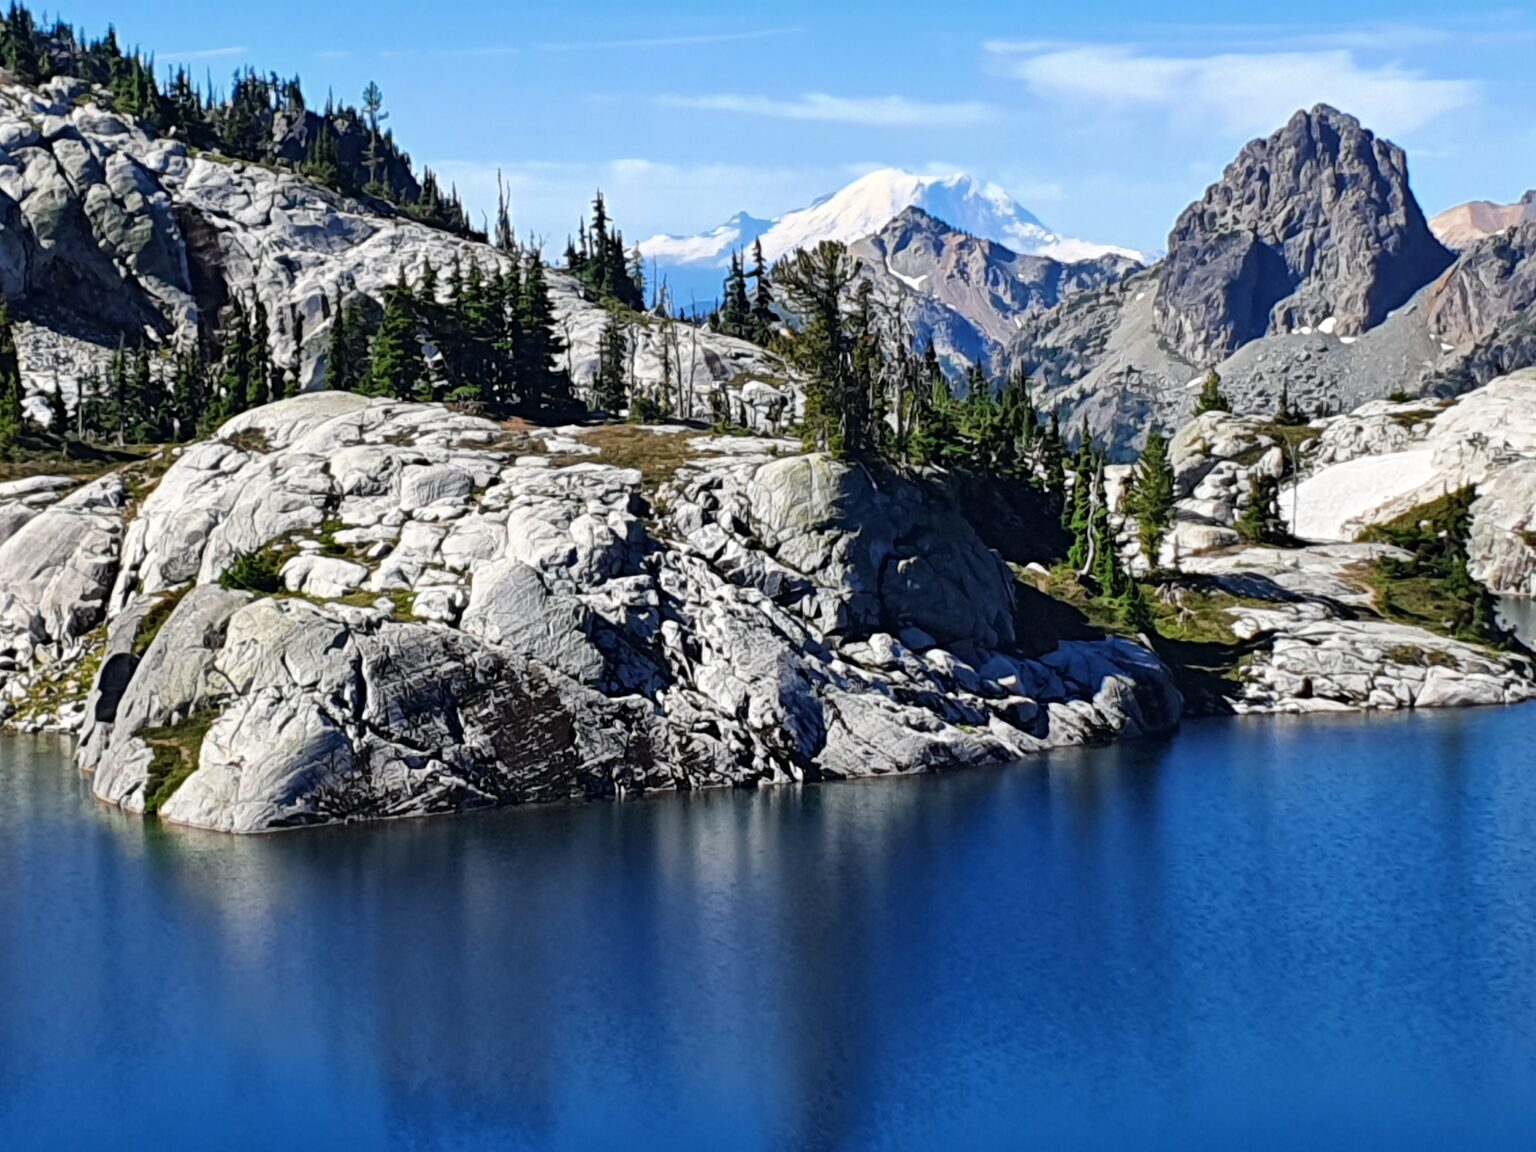 A closer look at Lower Robin Lake with Mount Rainier in the background